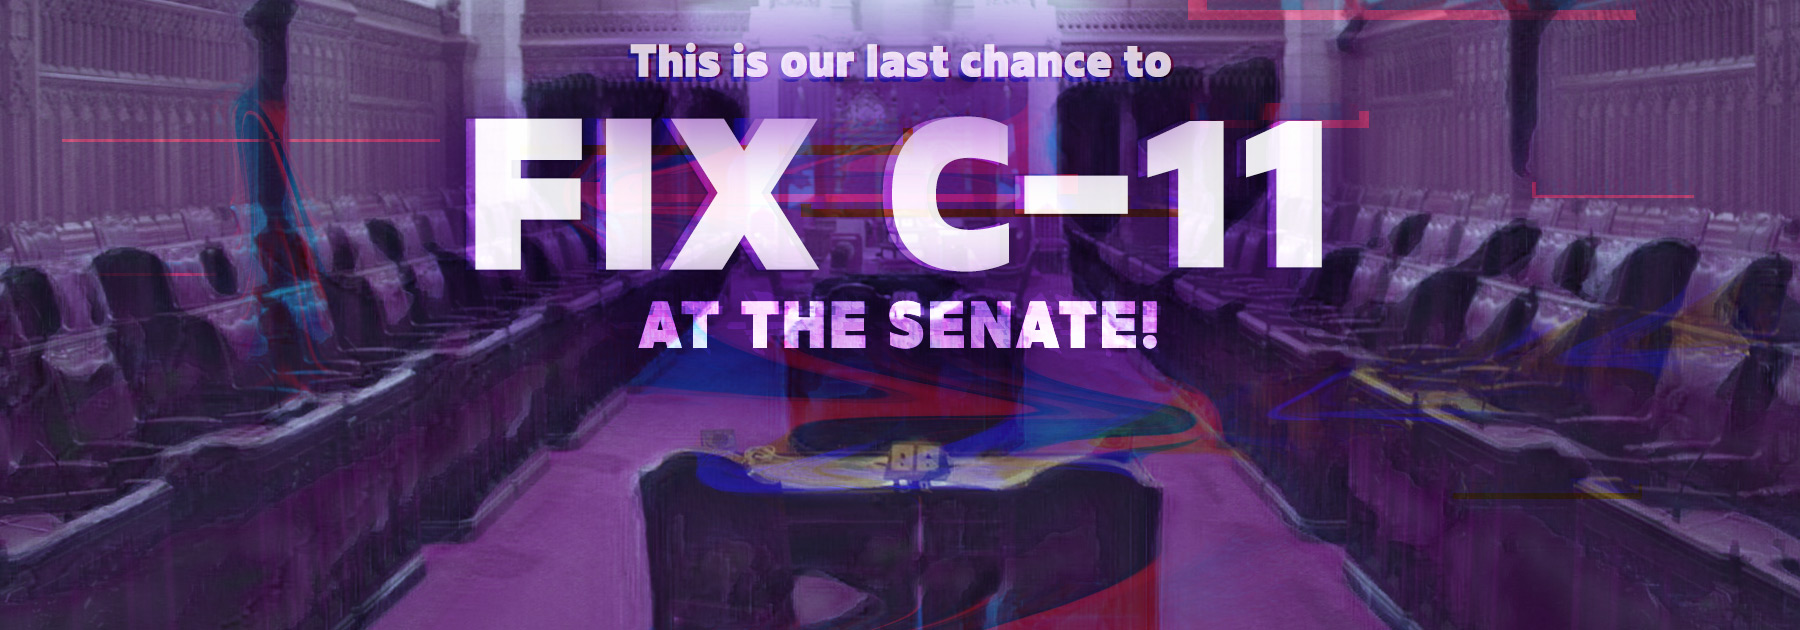 This is our last chance to Fix C-11: at the senate!